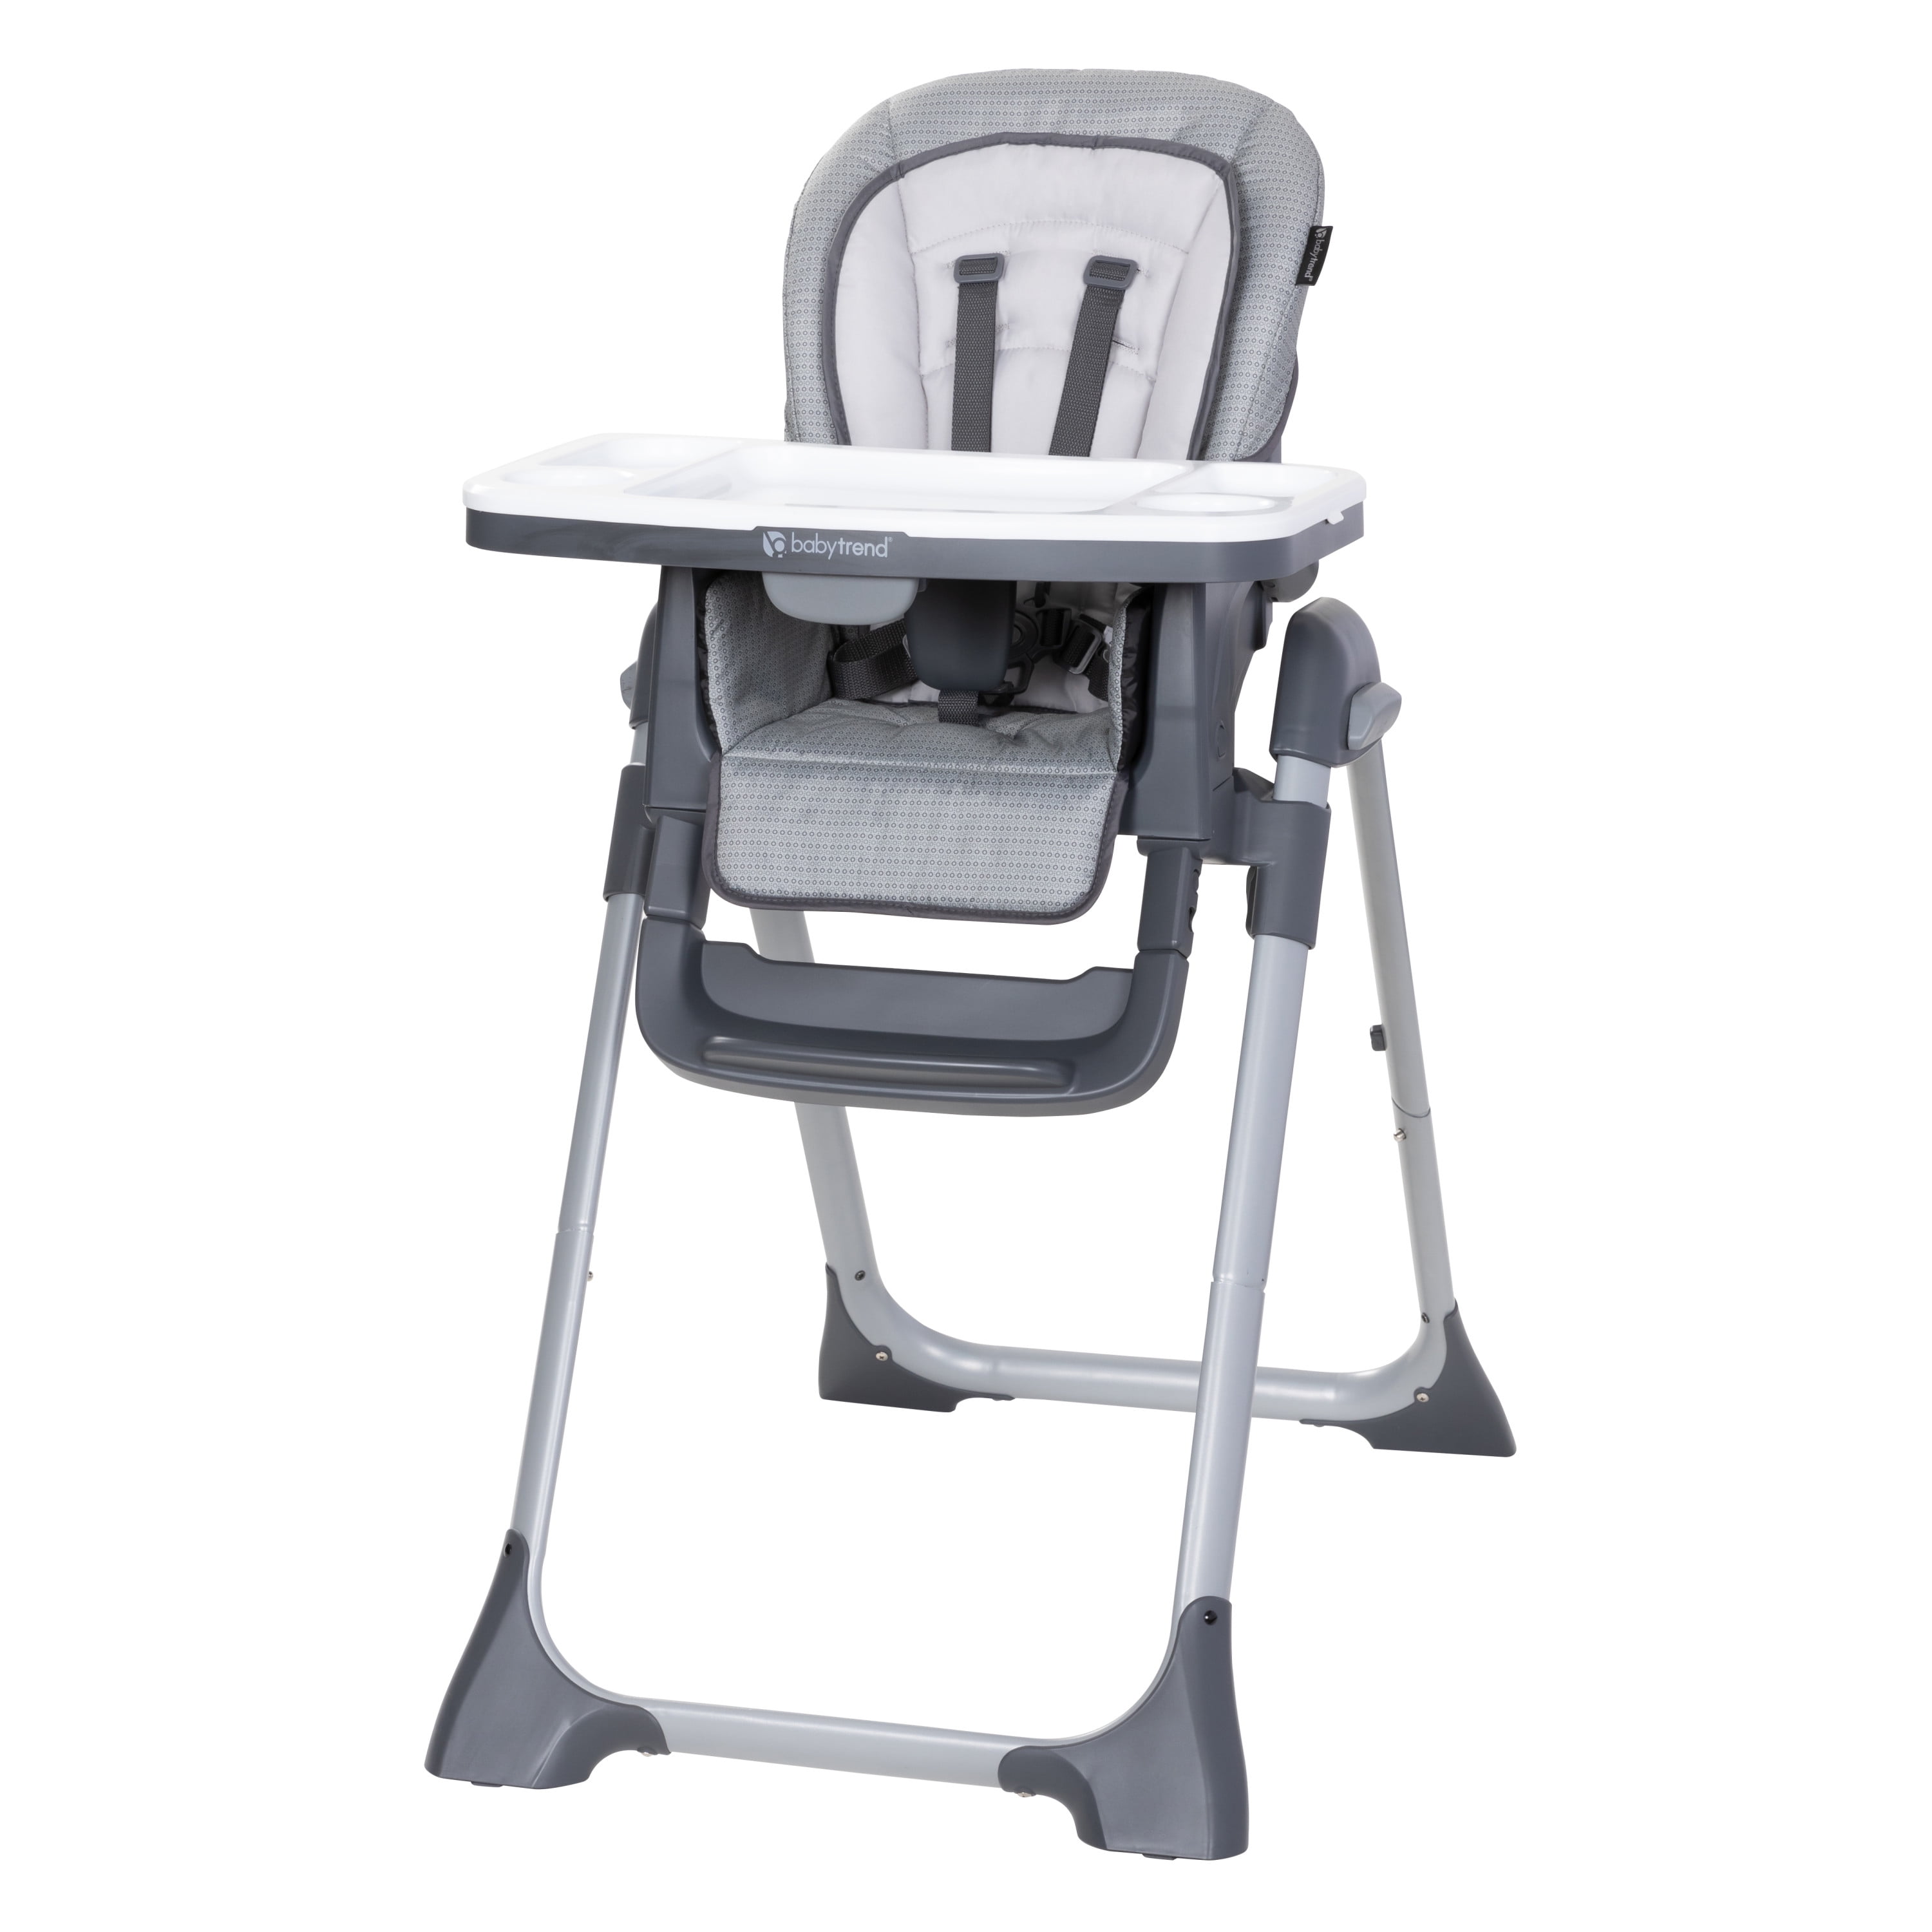 Kid Highchair Insert  HOT Fordable Toddler Dining Seat Nursery Baby Child